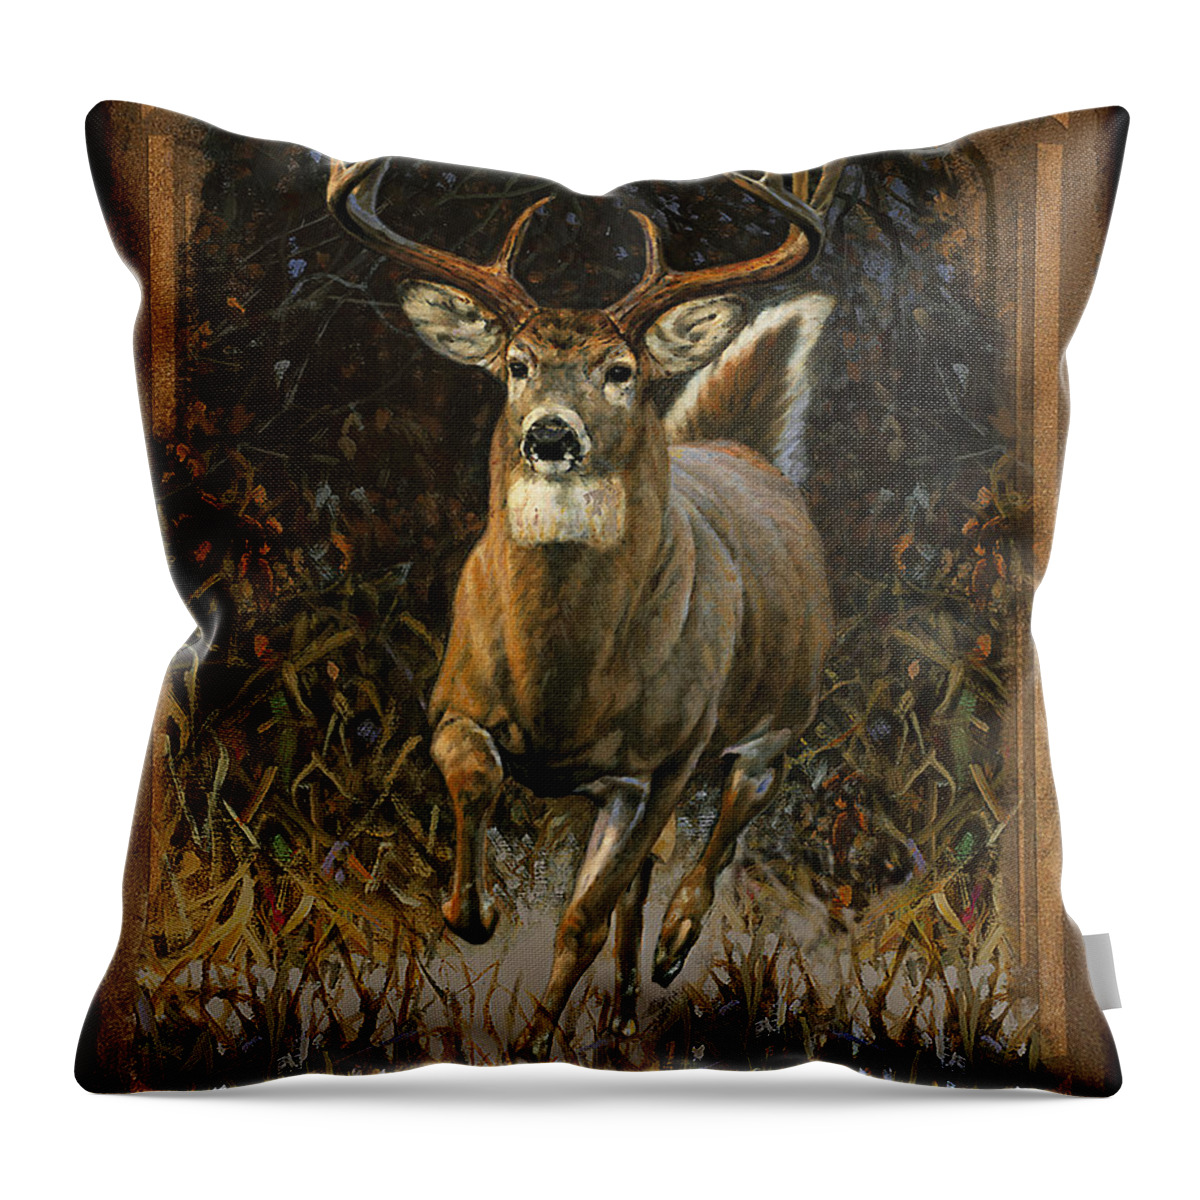 Bruce Miller Throw Pillow featuring the painting Whitetail Deer by JQ Licensing